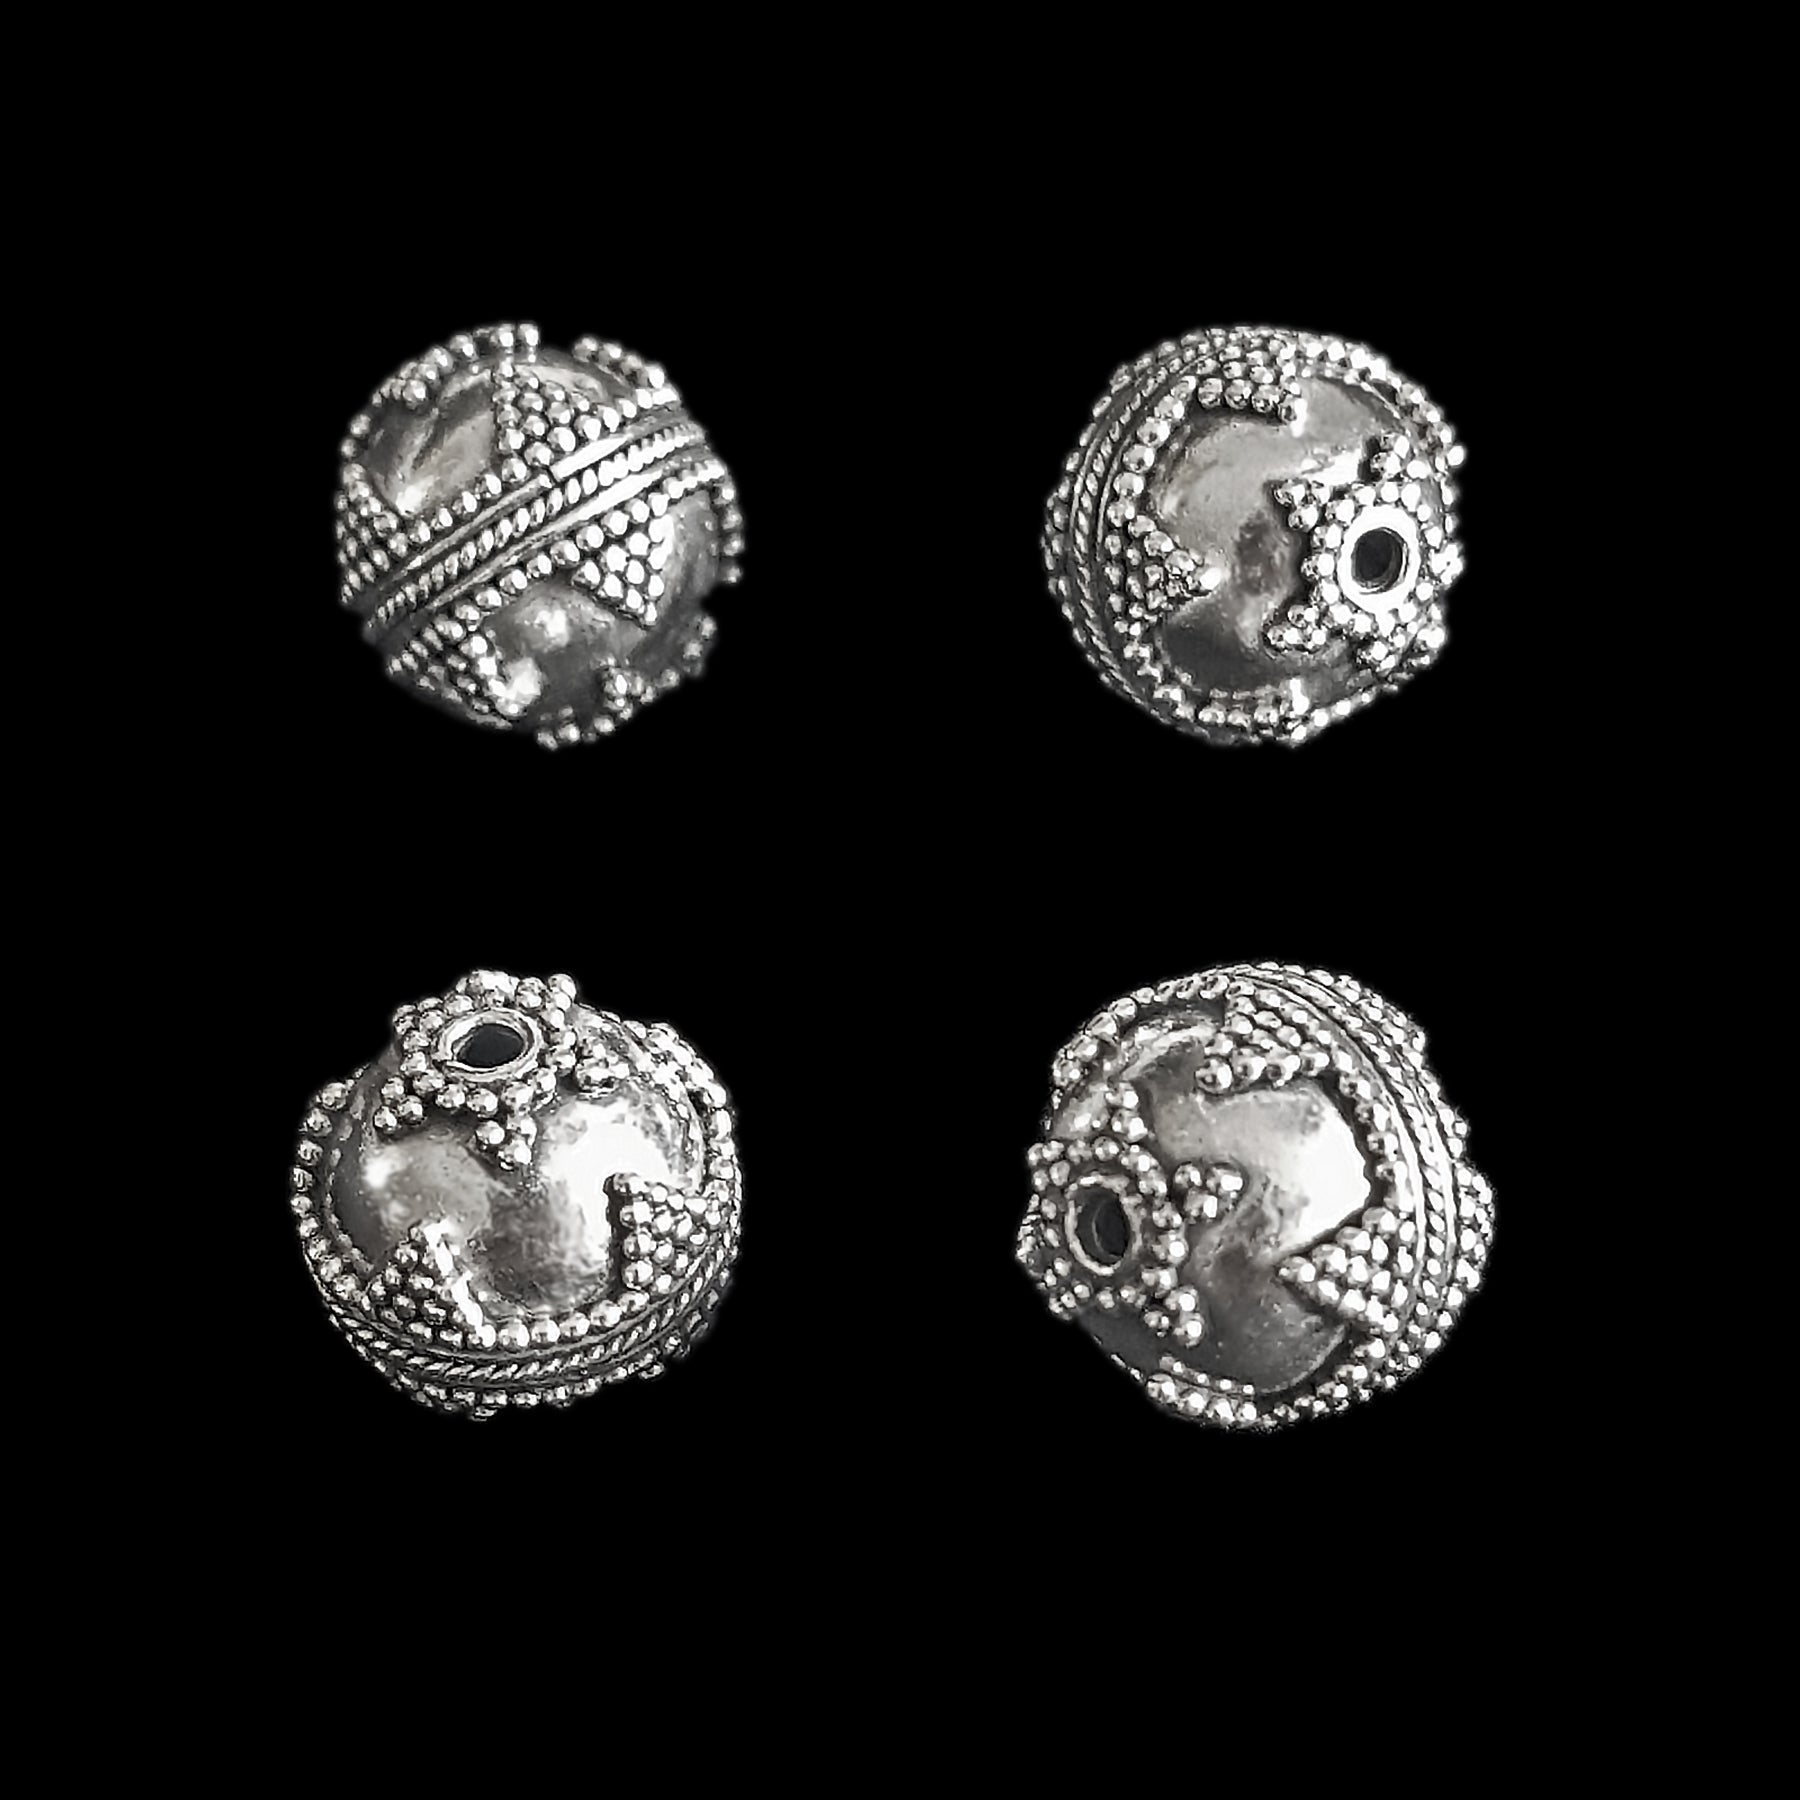 Silver Viking Beads from Visby - Triangles